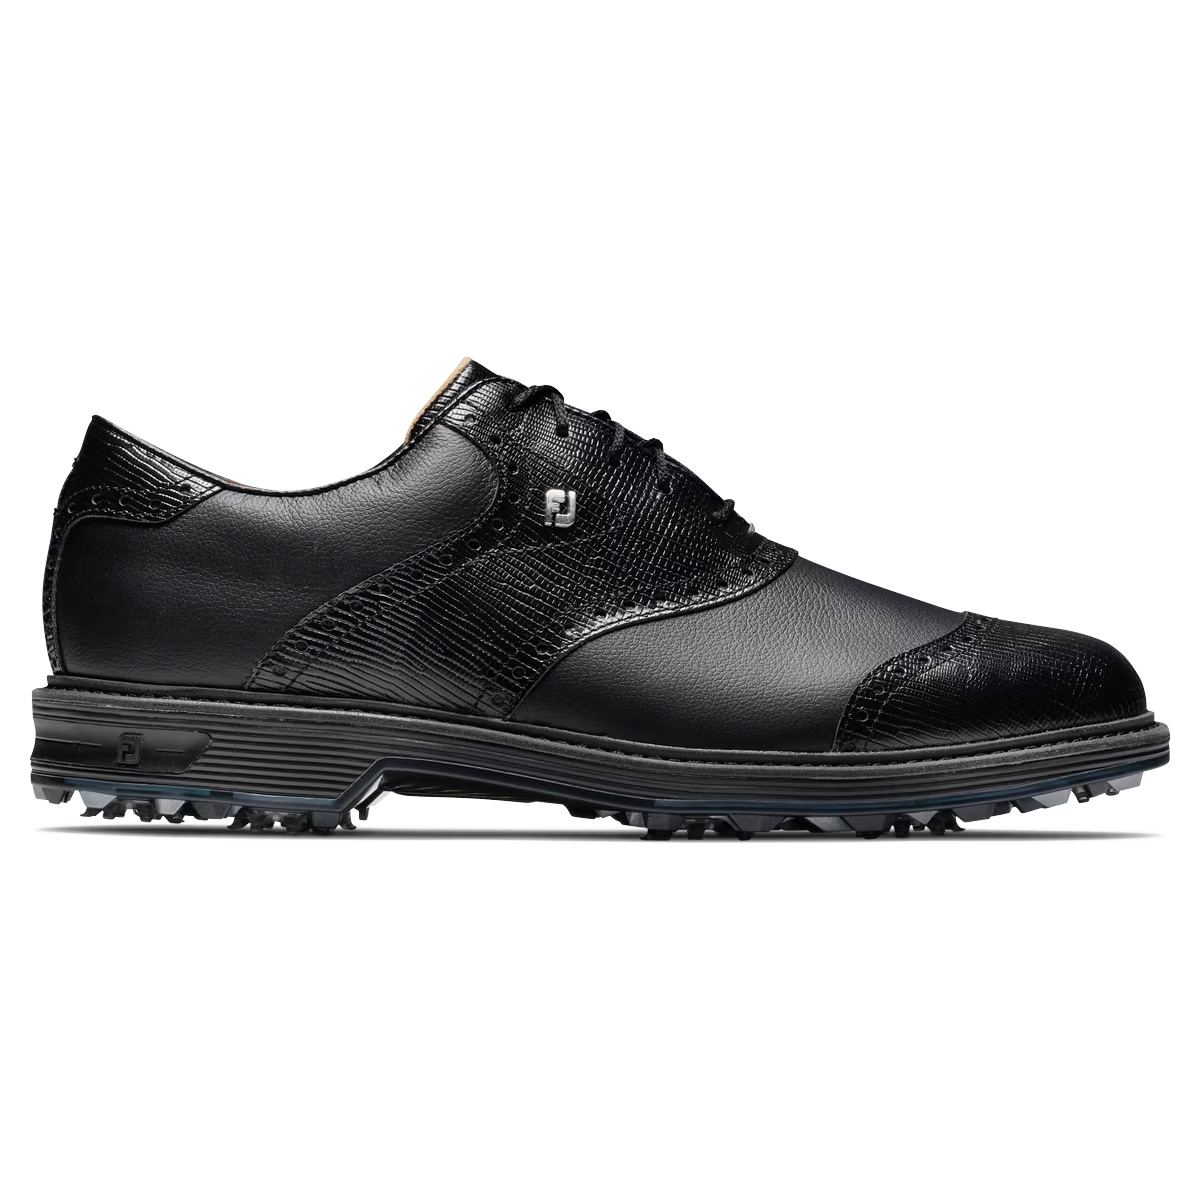 FootJoy Premiere Series Wilcox Mens Spiked Golf Shoes  - Black